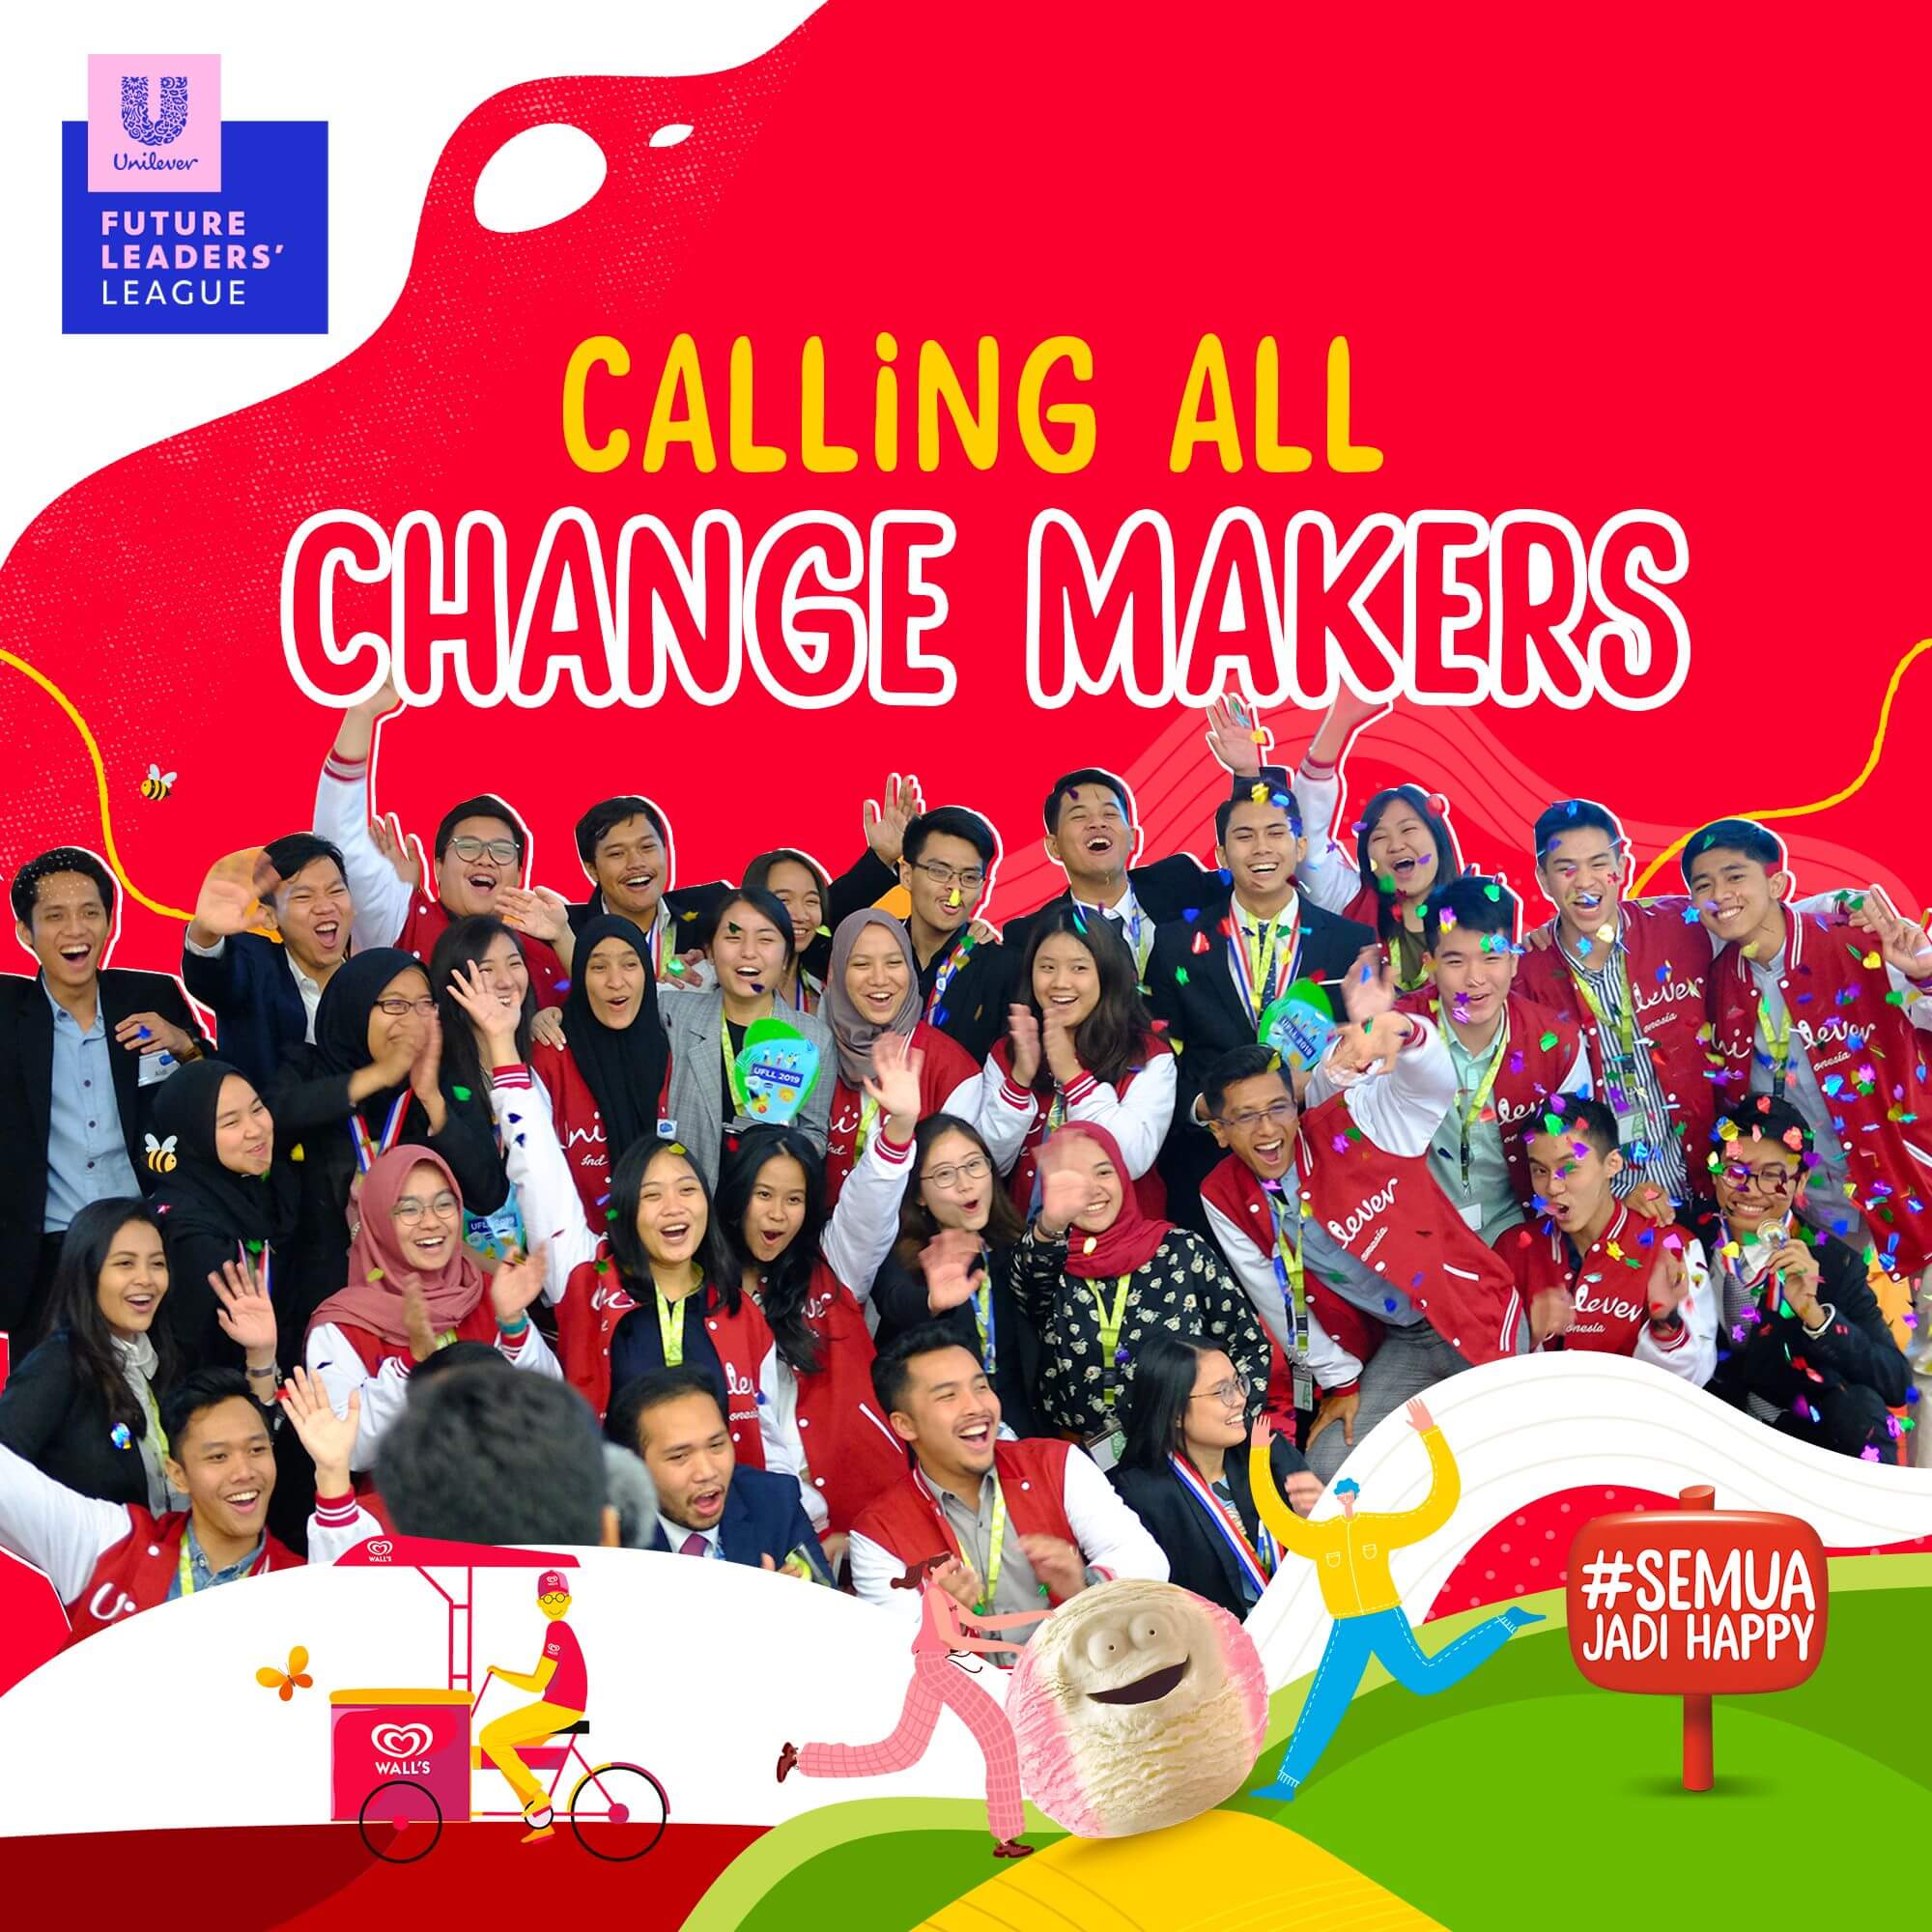 unilever-future-leaders-league-2020-how-kalibrr-helped-unilever-discover-young-change-makers-in-indonesia